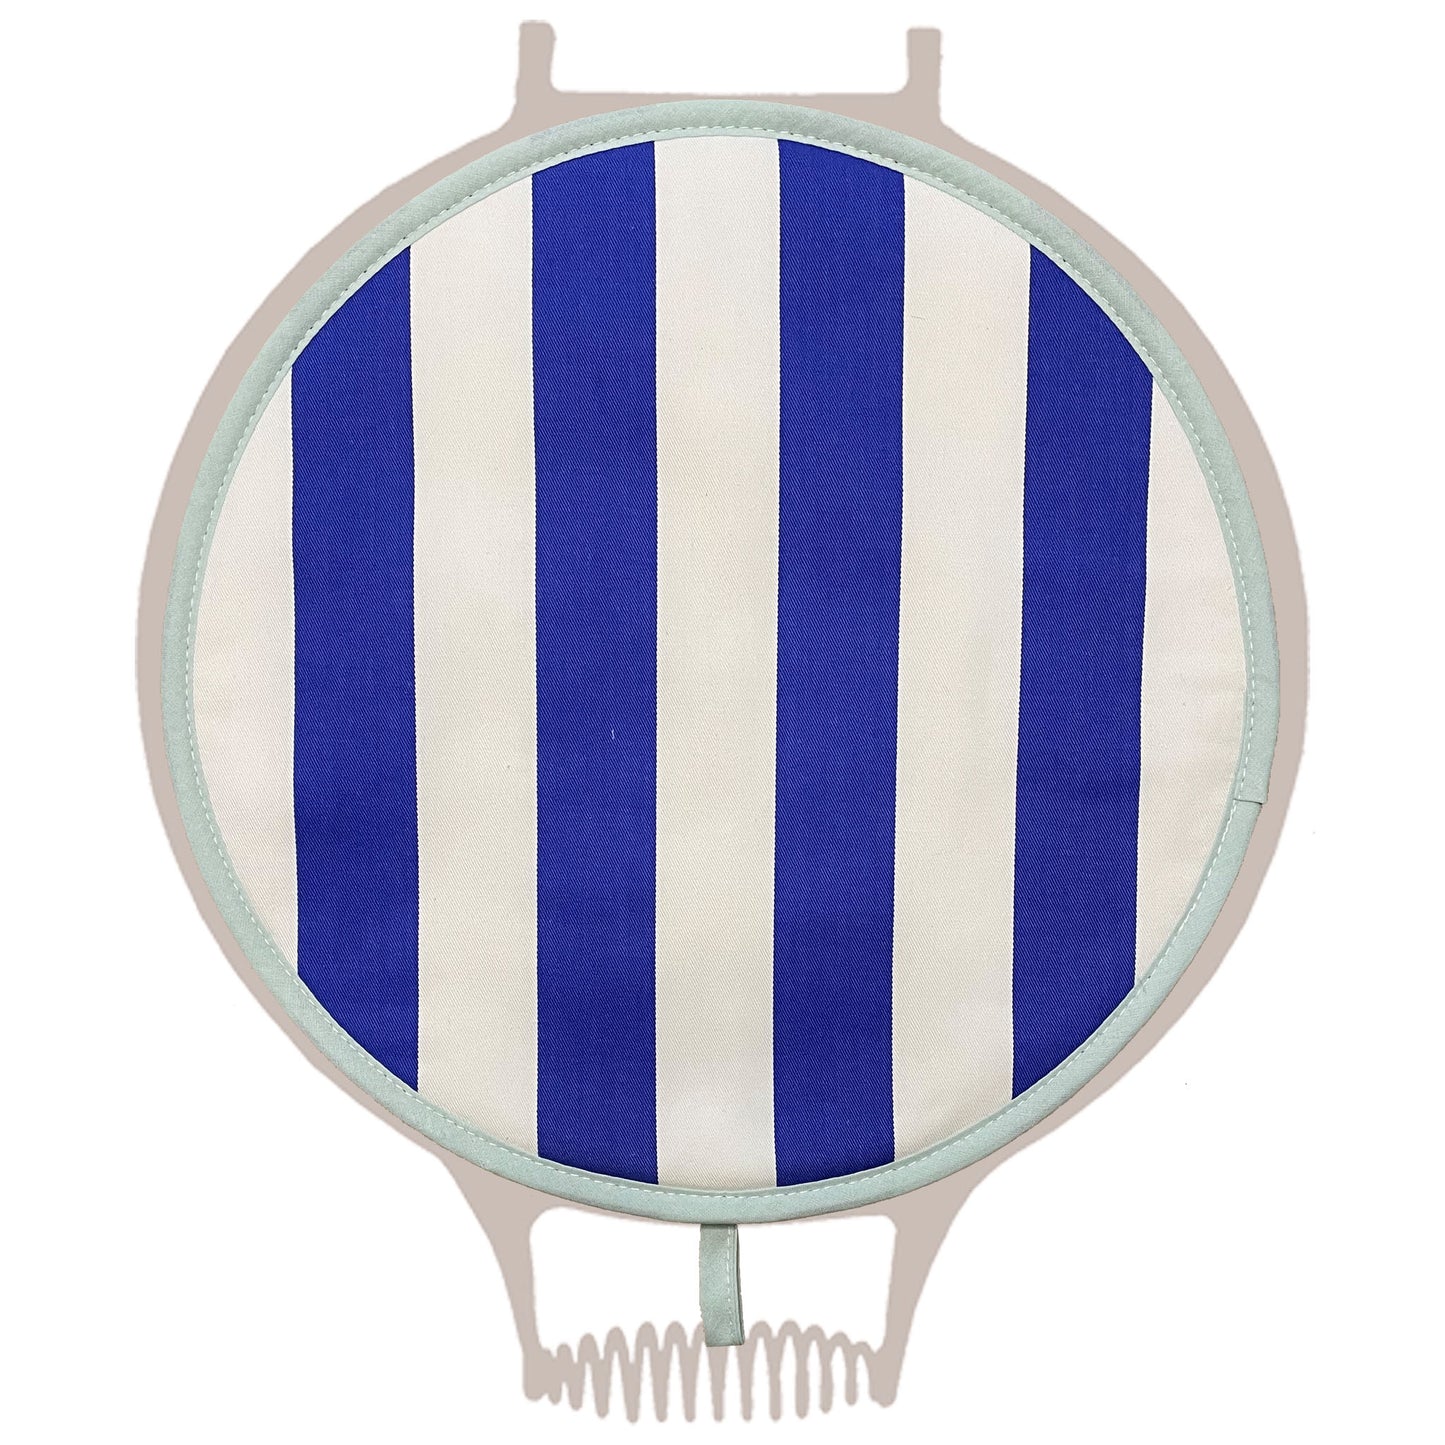 Blue and White Wide Stripe Chefs Pad for use with Aga Range Cookers